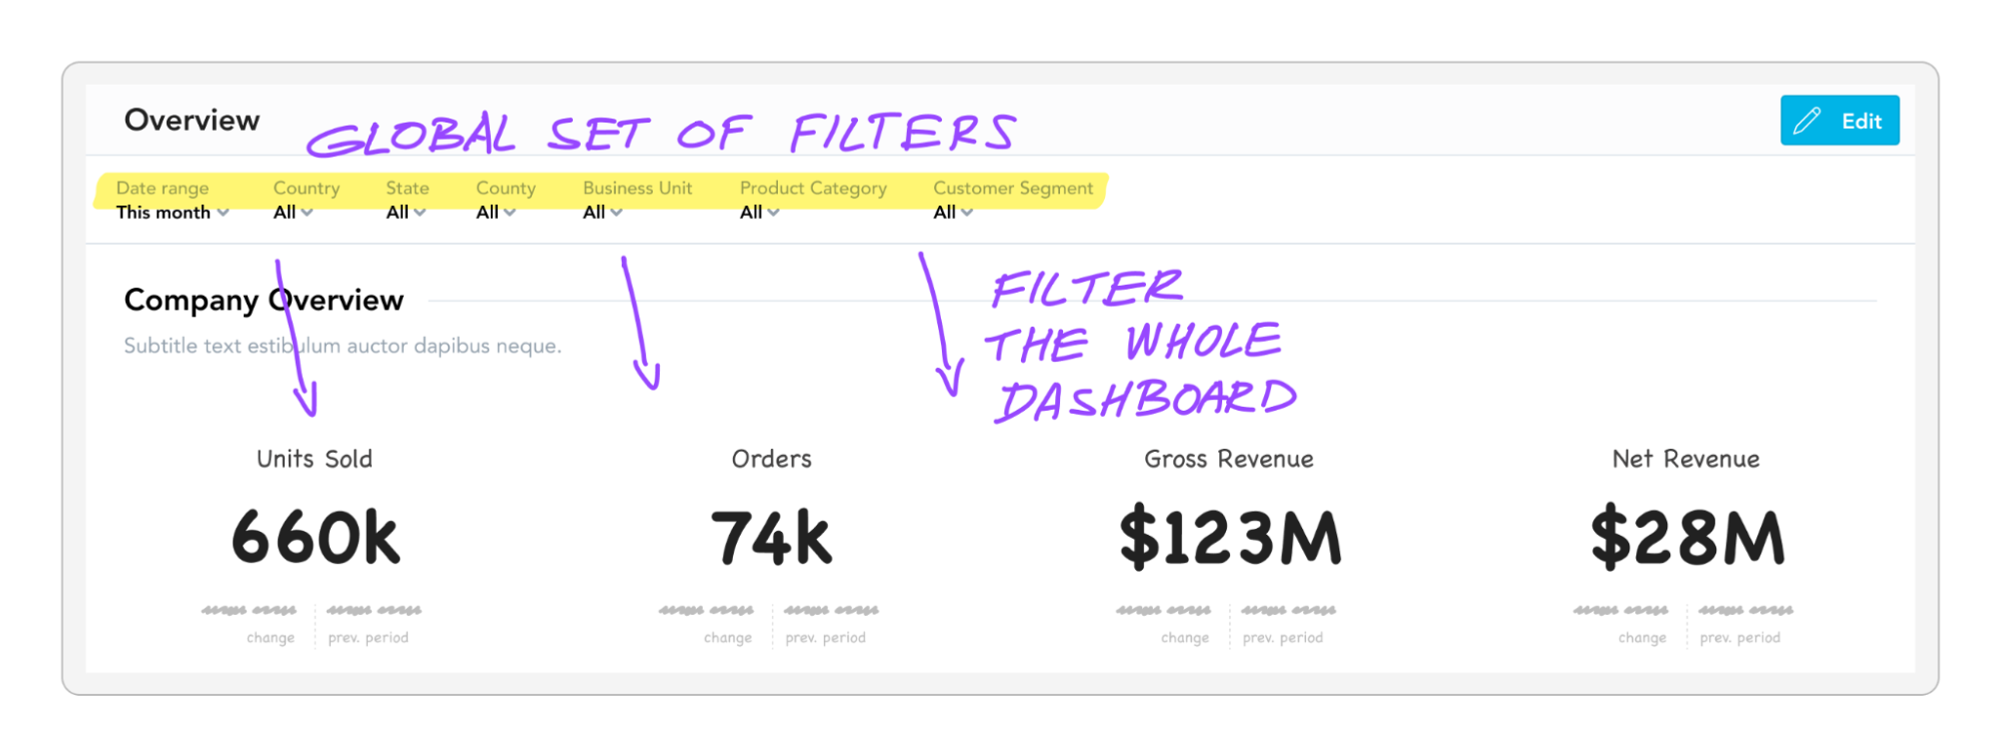 Filtering can change a company-wide dashboard into a hyper-focused view of a single country, business unit, product category, and customer segment.